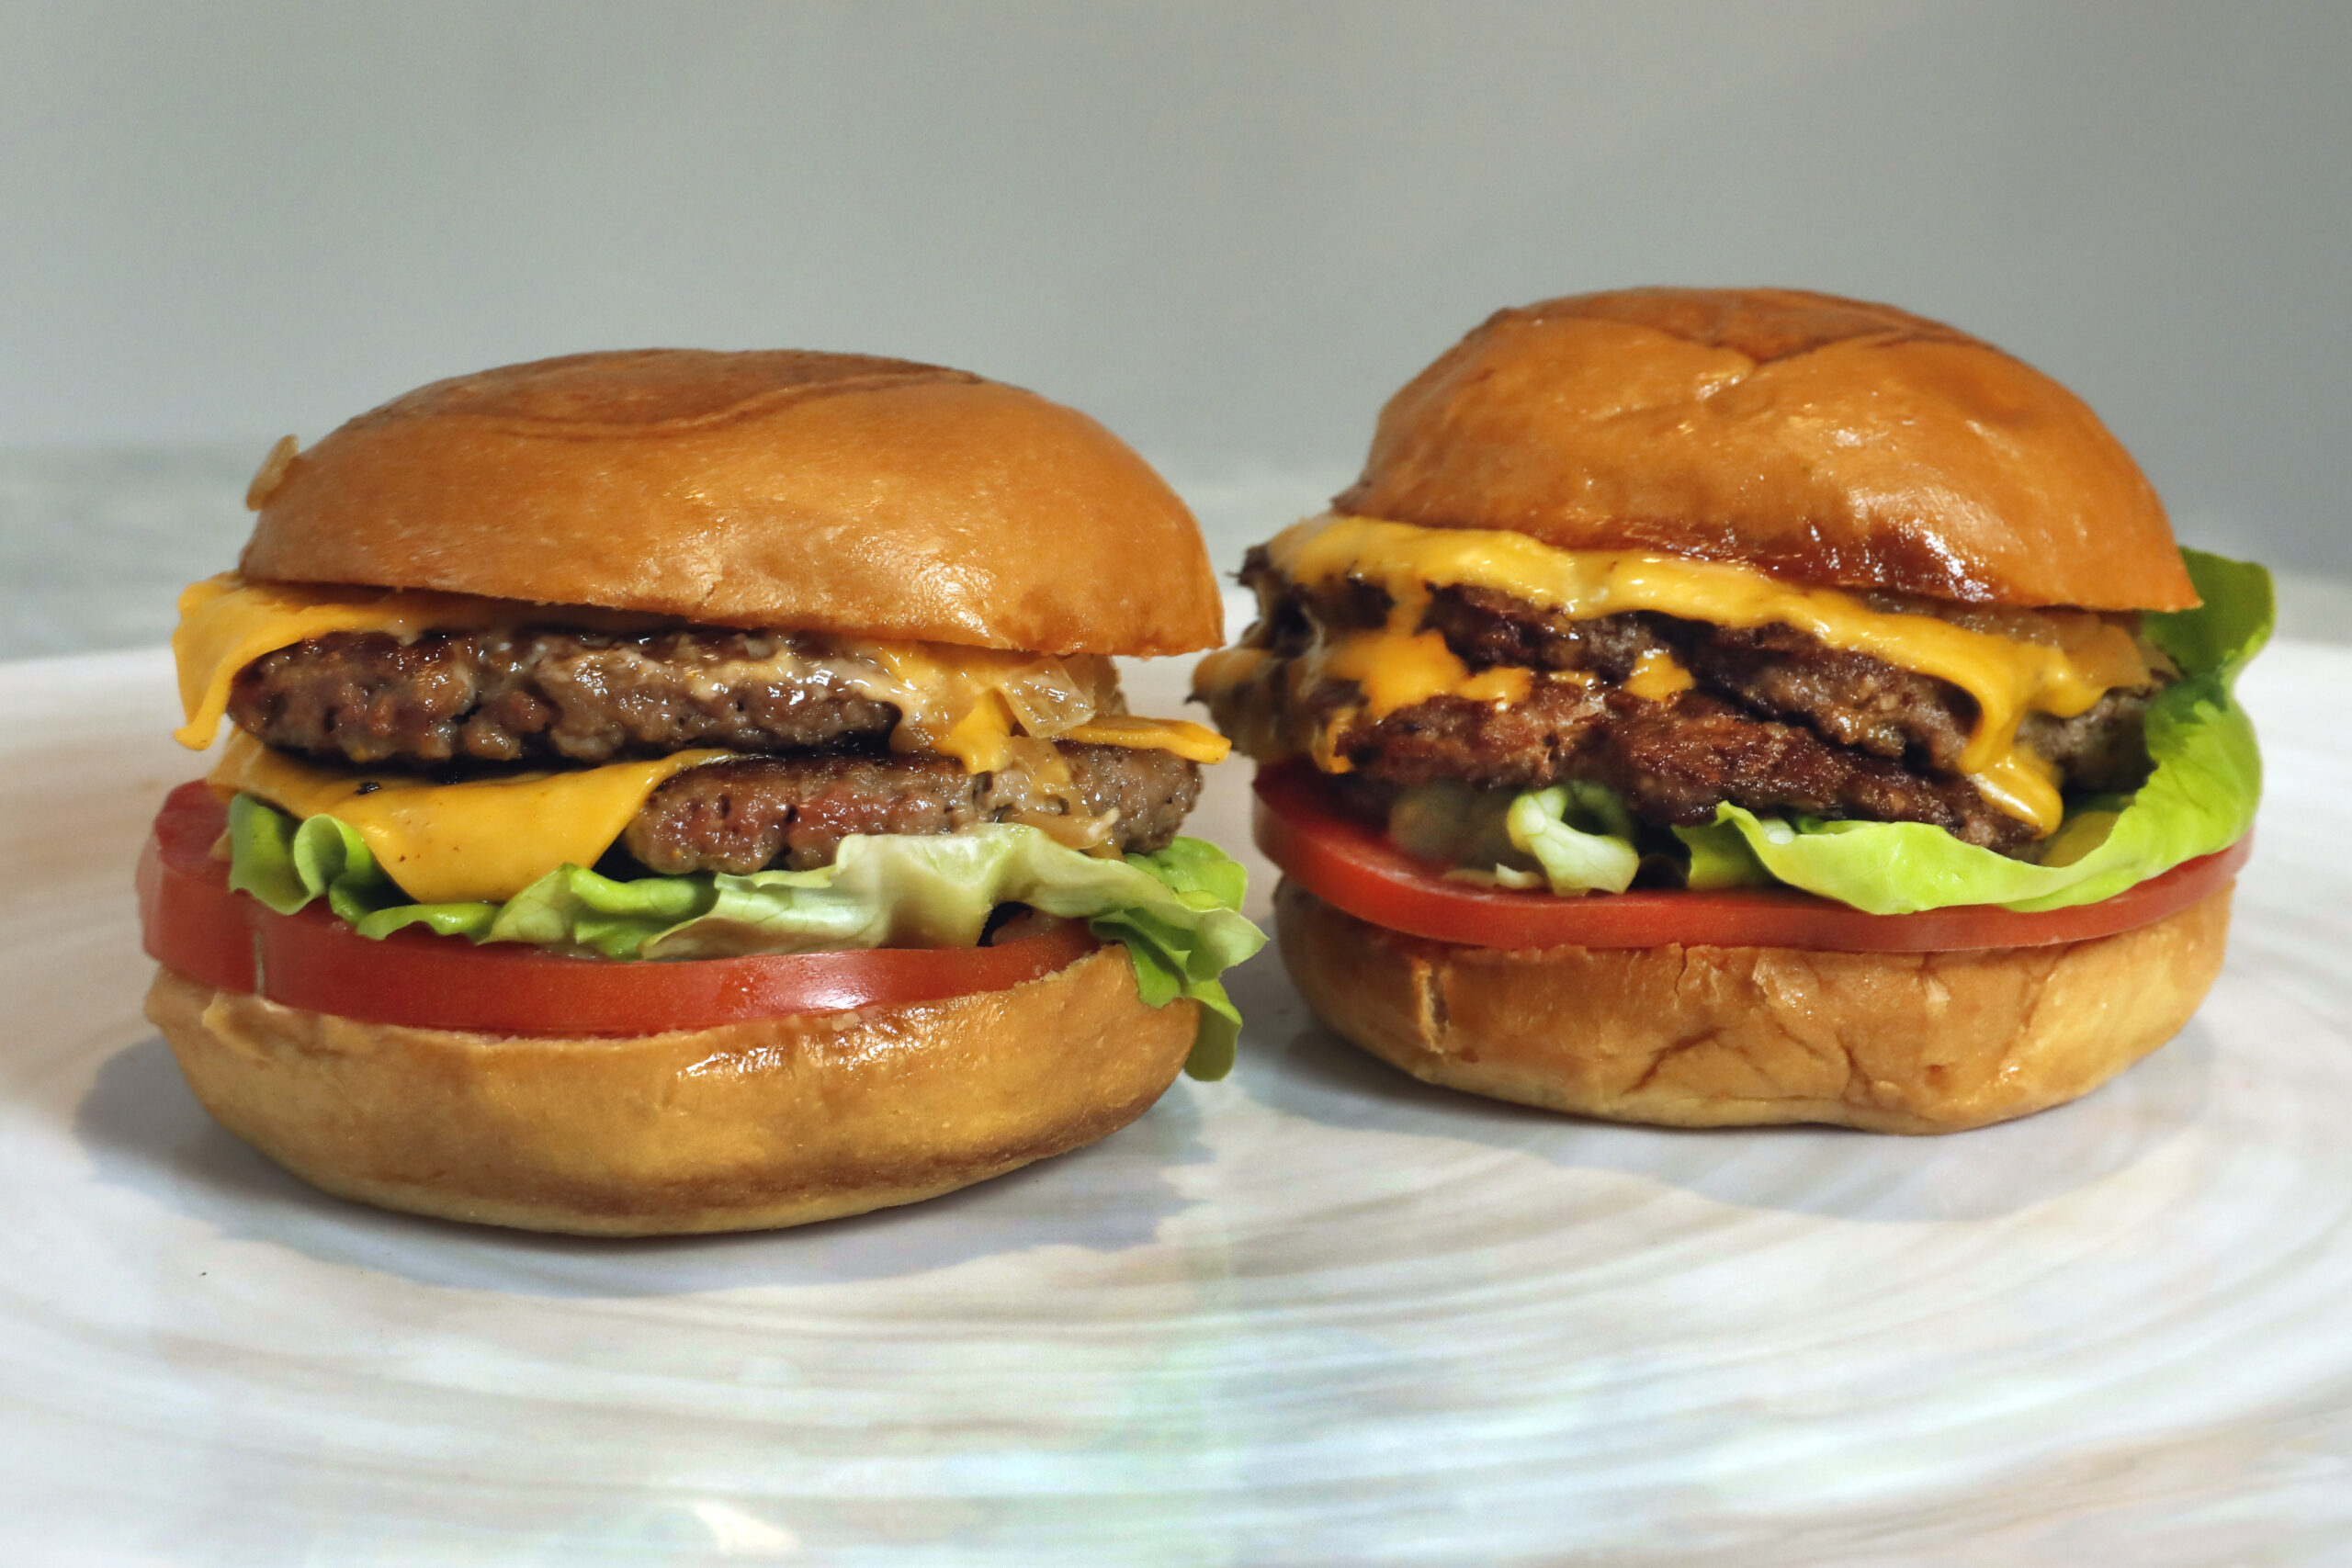 An Original Impossible Burger, left, and a Cali Burger, from Umami Burger, are shown in this photo.